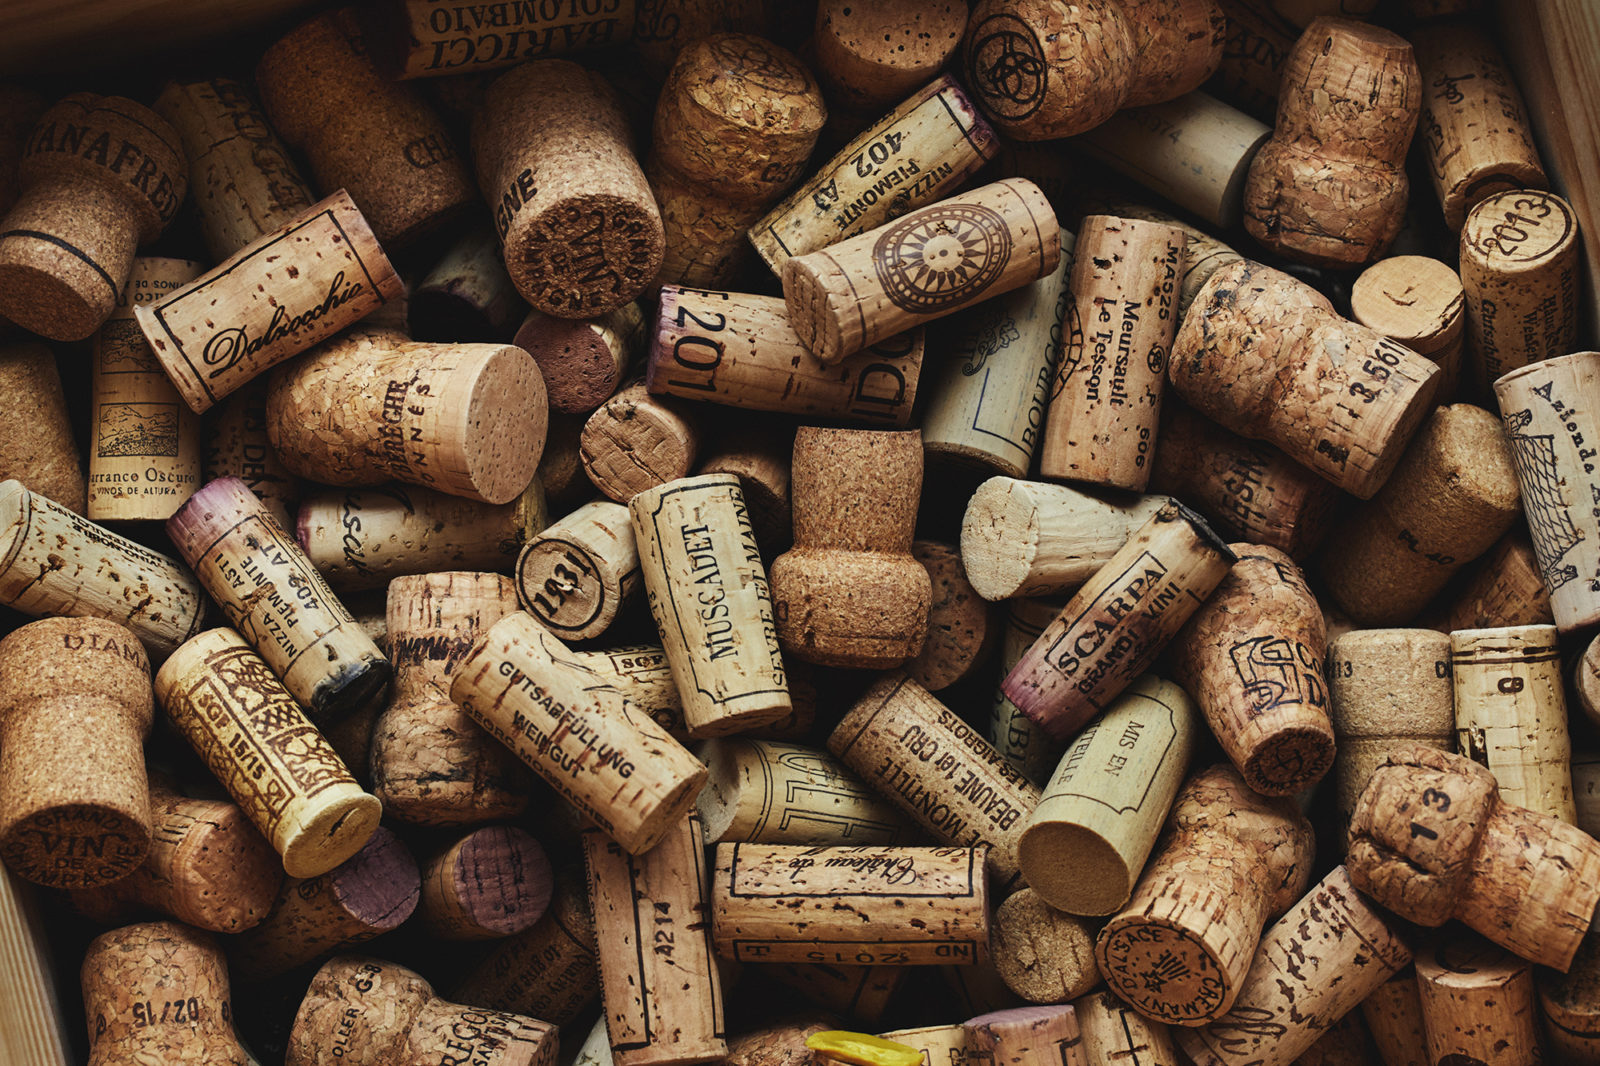 a bunch of collected wine corks